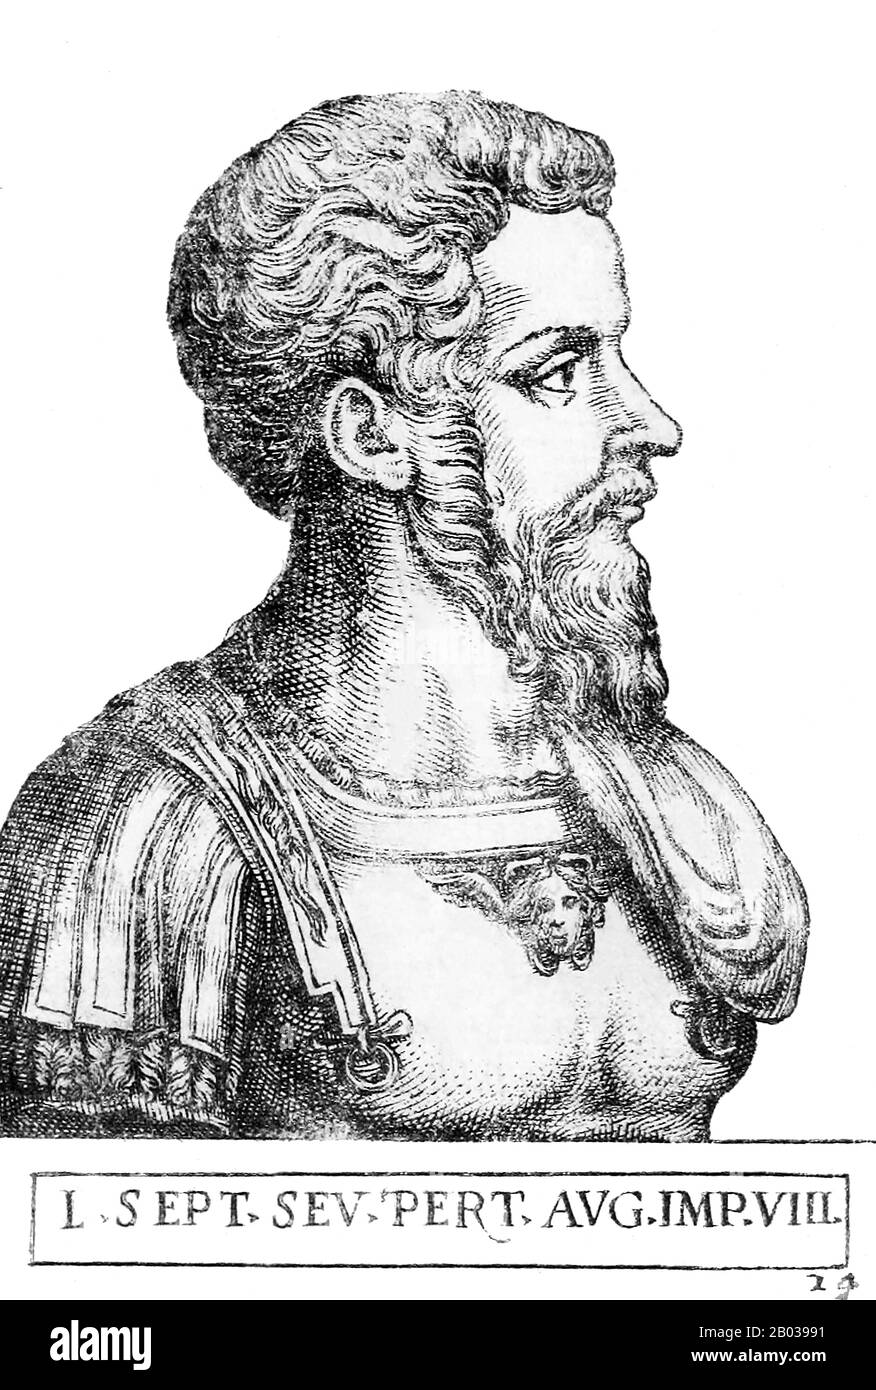 Septimius Severus (145-211 CE) was born in the Roman province of Africa, and advanced steadily through the customary succession of offices (the 'cursus honorum') during the reigns of Marcus Aurelius and Commodus. He was governor of Pannonia Superior when word of Pertniax's murder and Didius Julianus' accession reached him in 193 CE.  In response to Julianus' controversial accession through buying the emperorship in an auction, many rivals rose up and declared themselves emperor, with Severus being one of them, beginning what was known as the Year of the Five Emperors. Hurrying to Rome, Severus Stock Photo